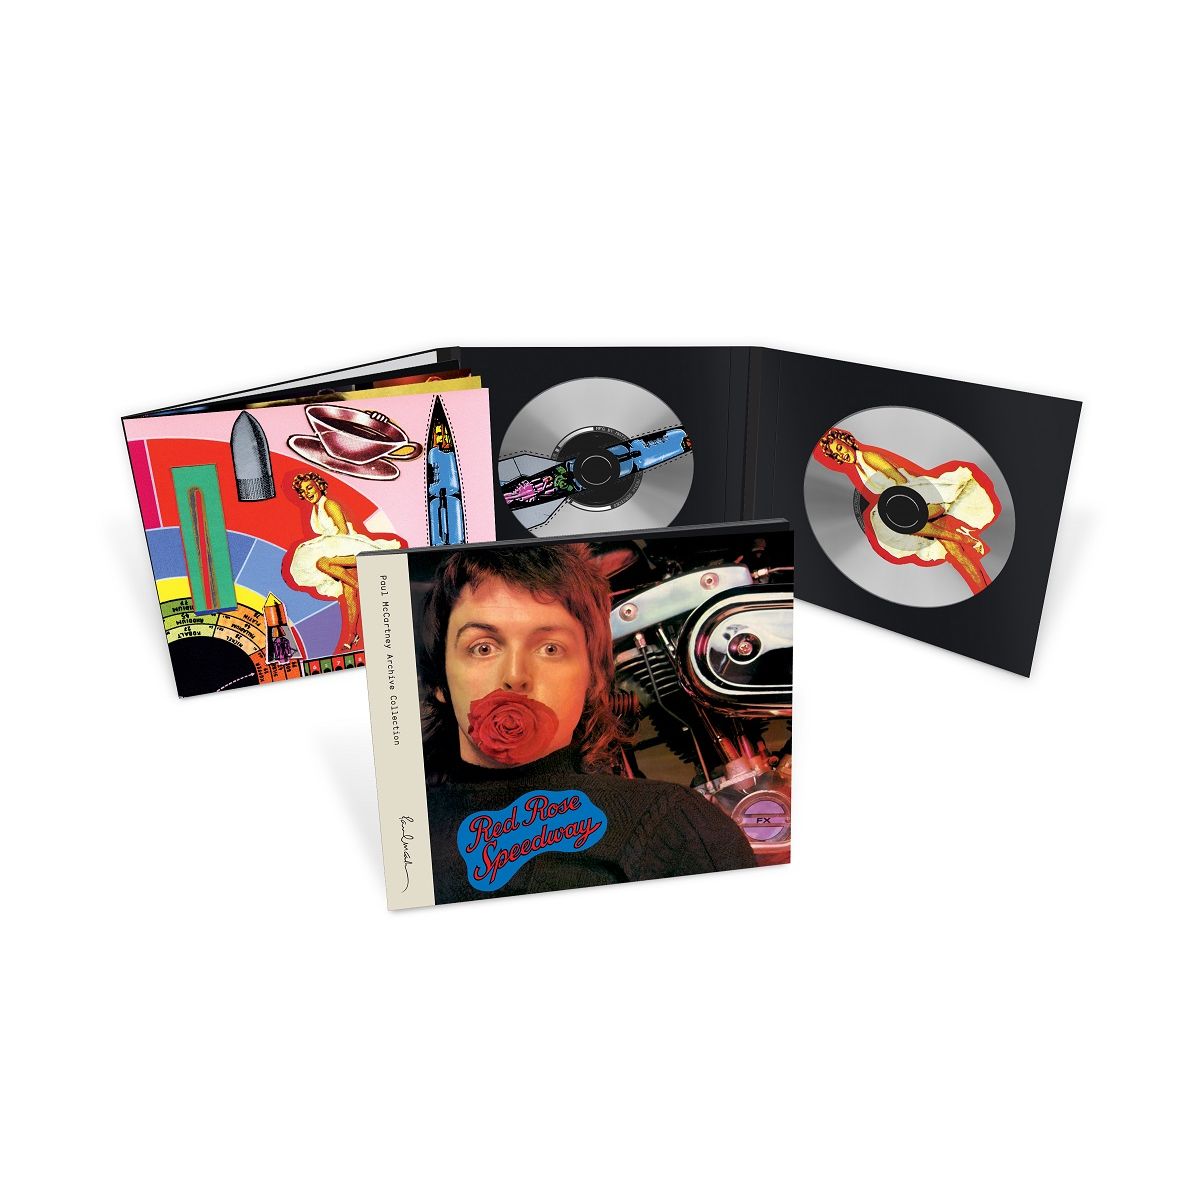 PAUL MCCARTNEY & WINGS / ポール・マッカートニー&ウィングス / RED ROSE SPEEDWAY (DELUXE EDITION 2CD)